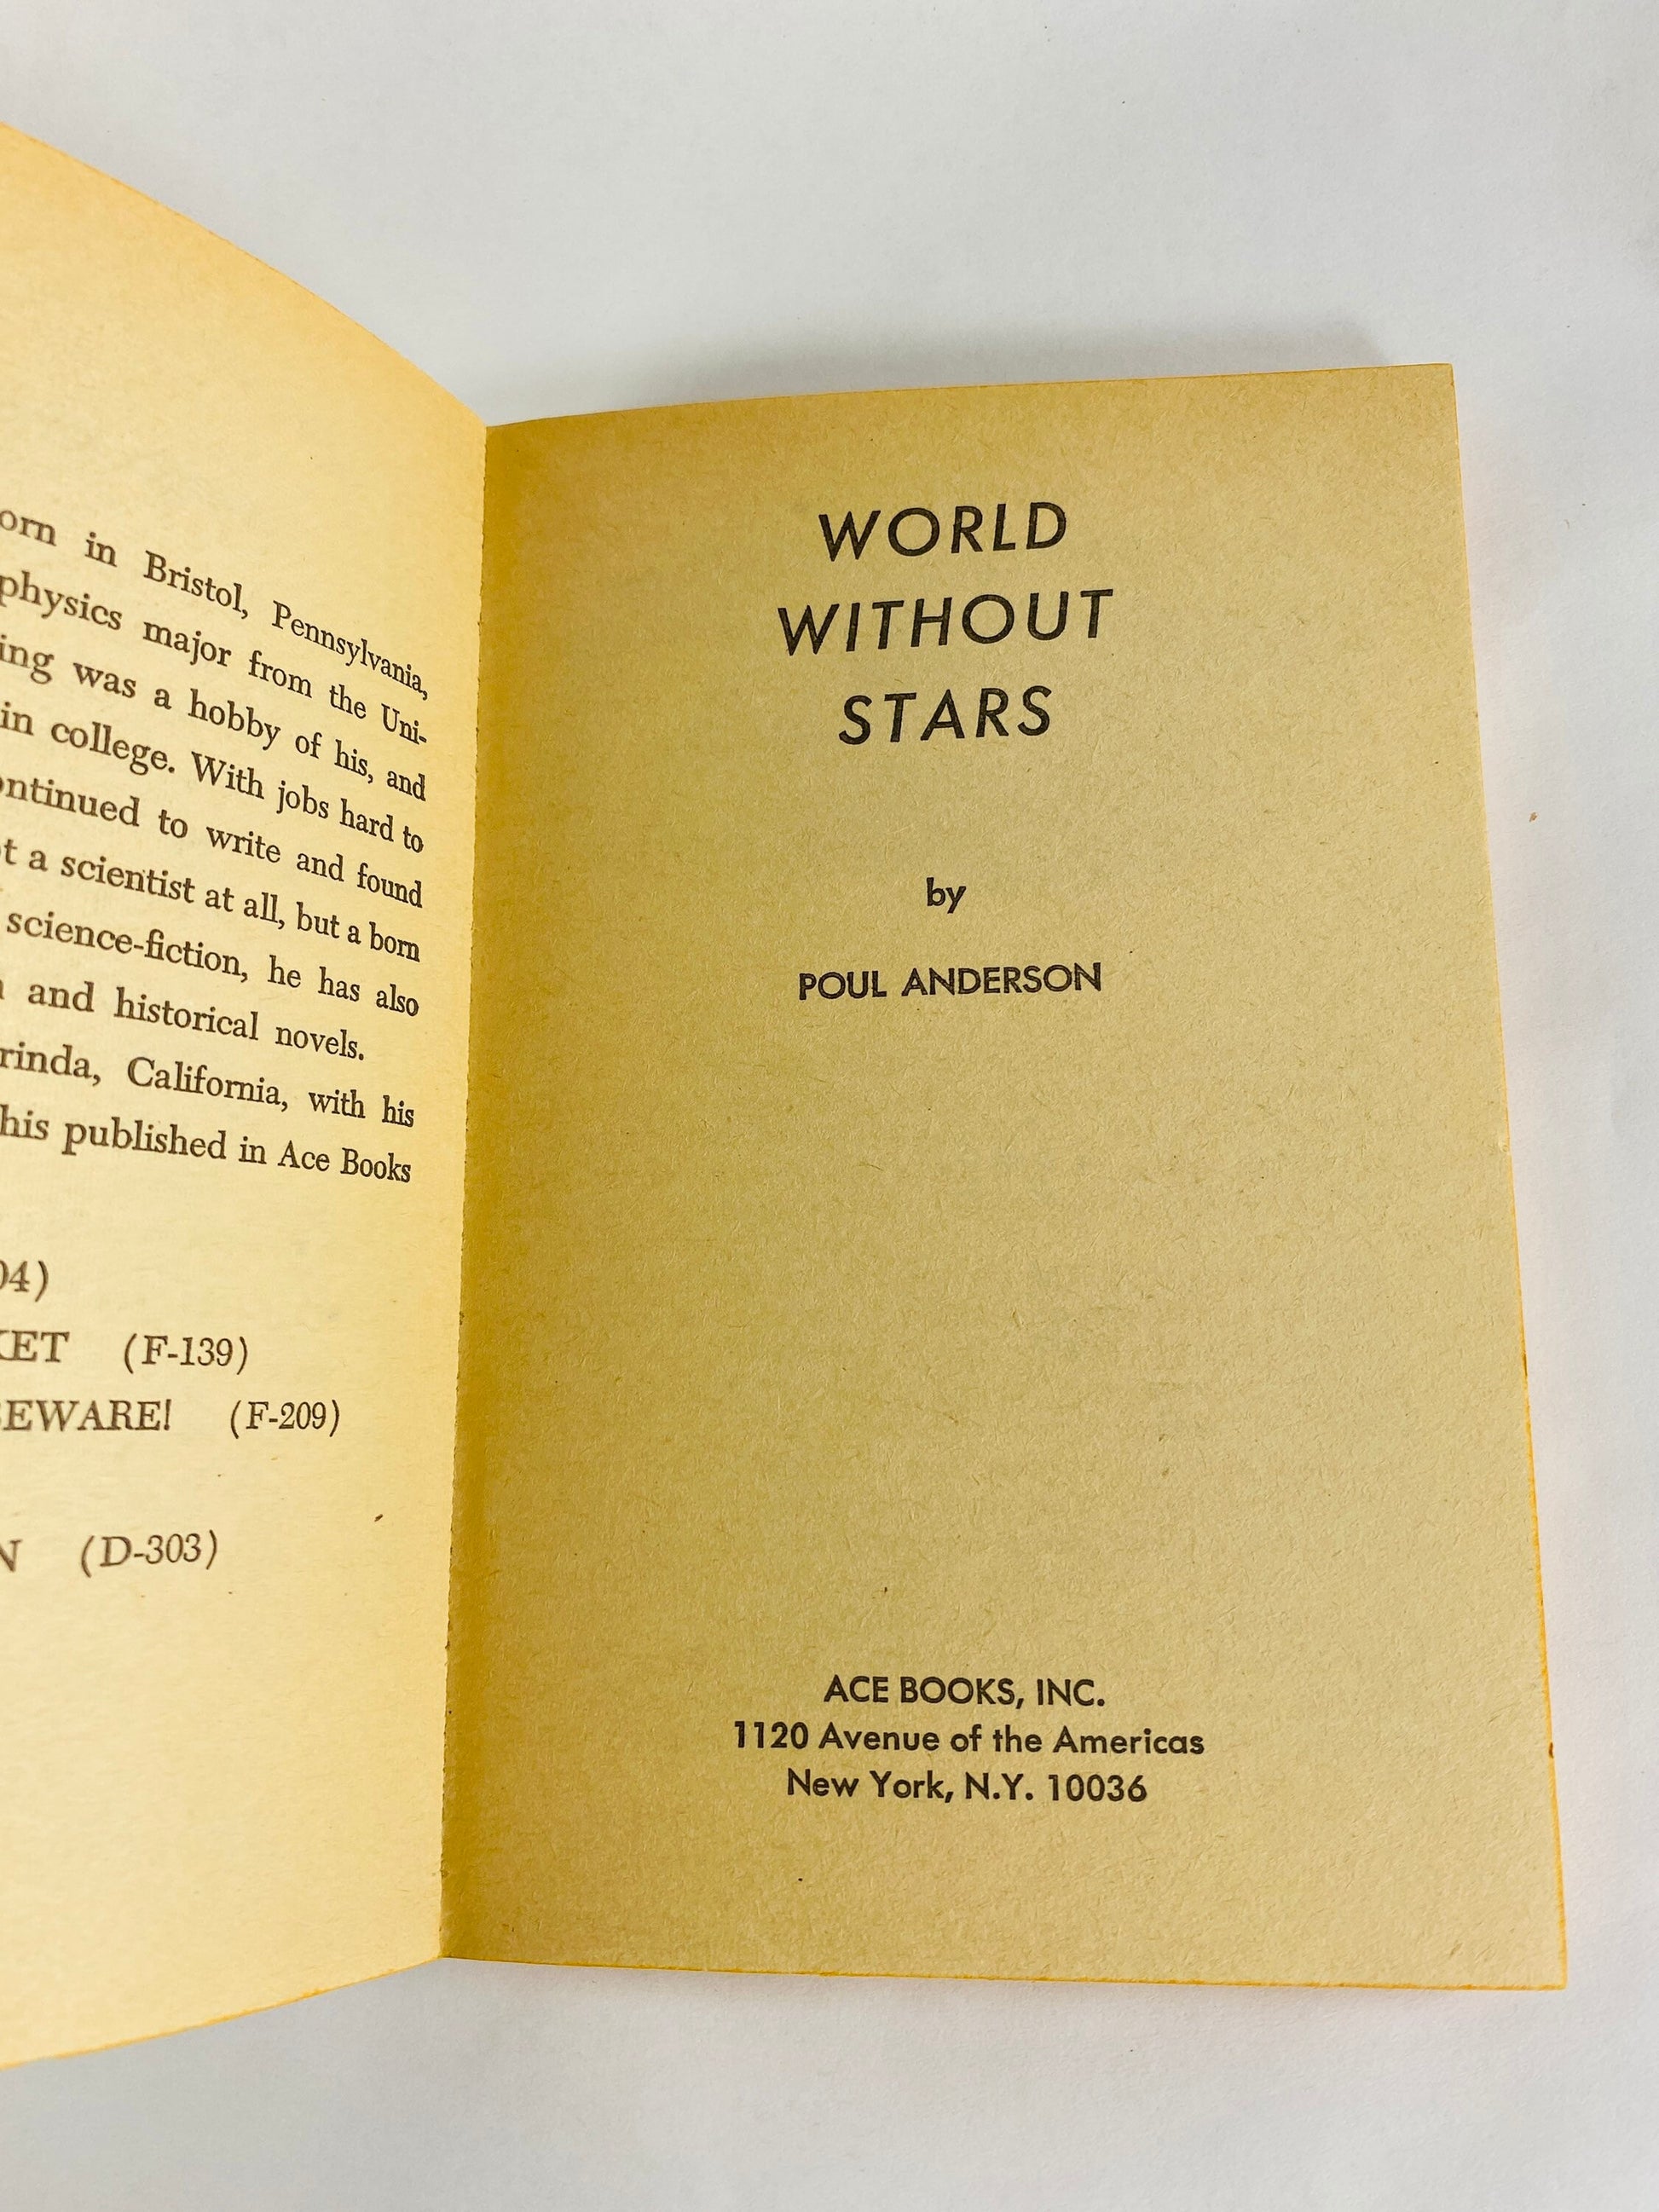 World Without Stars vintage paperback book by Poul Anderson circa 1966 about a planet split by a world war Science fiction scifi